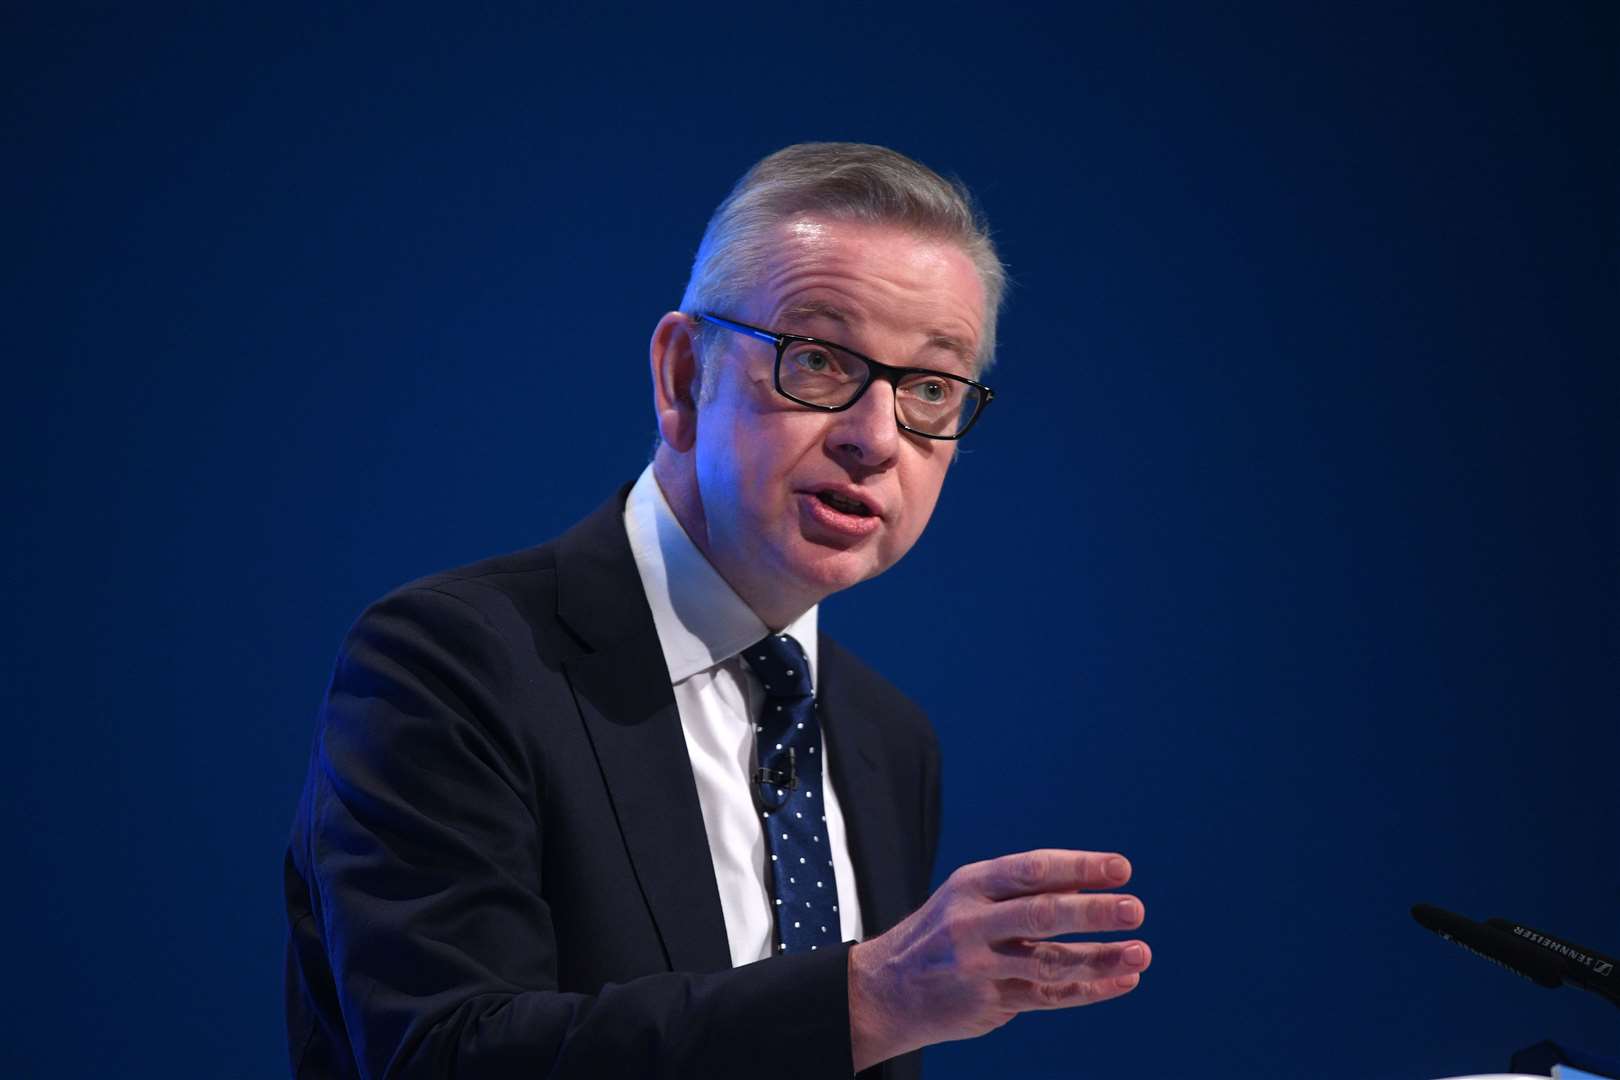 Michael Gove says businesses need to step up their preparations (Stefan Rousseau/PA)